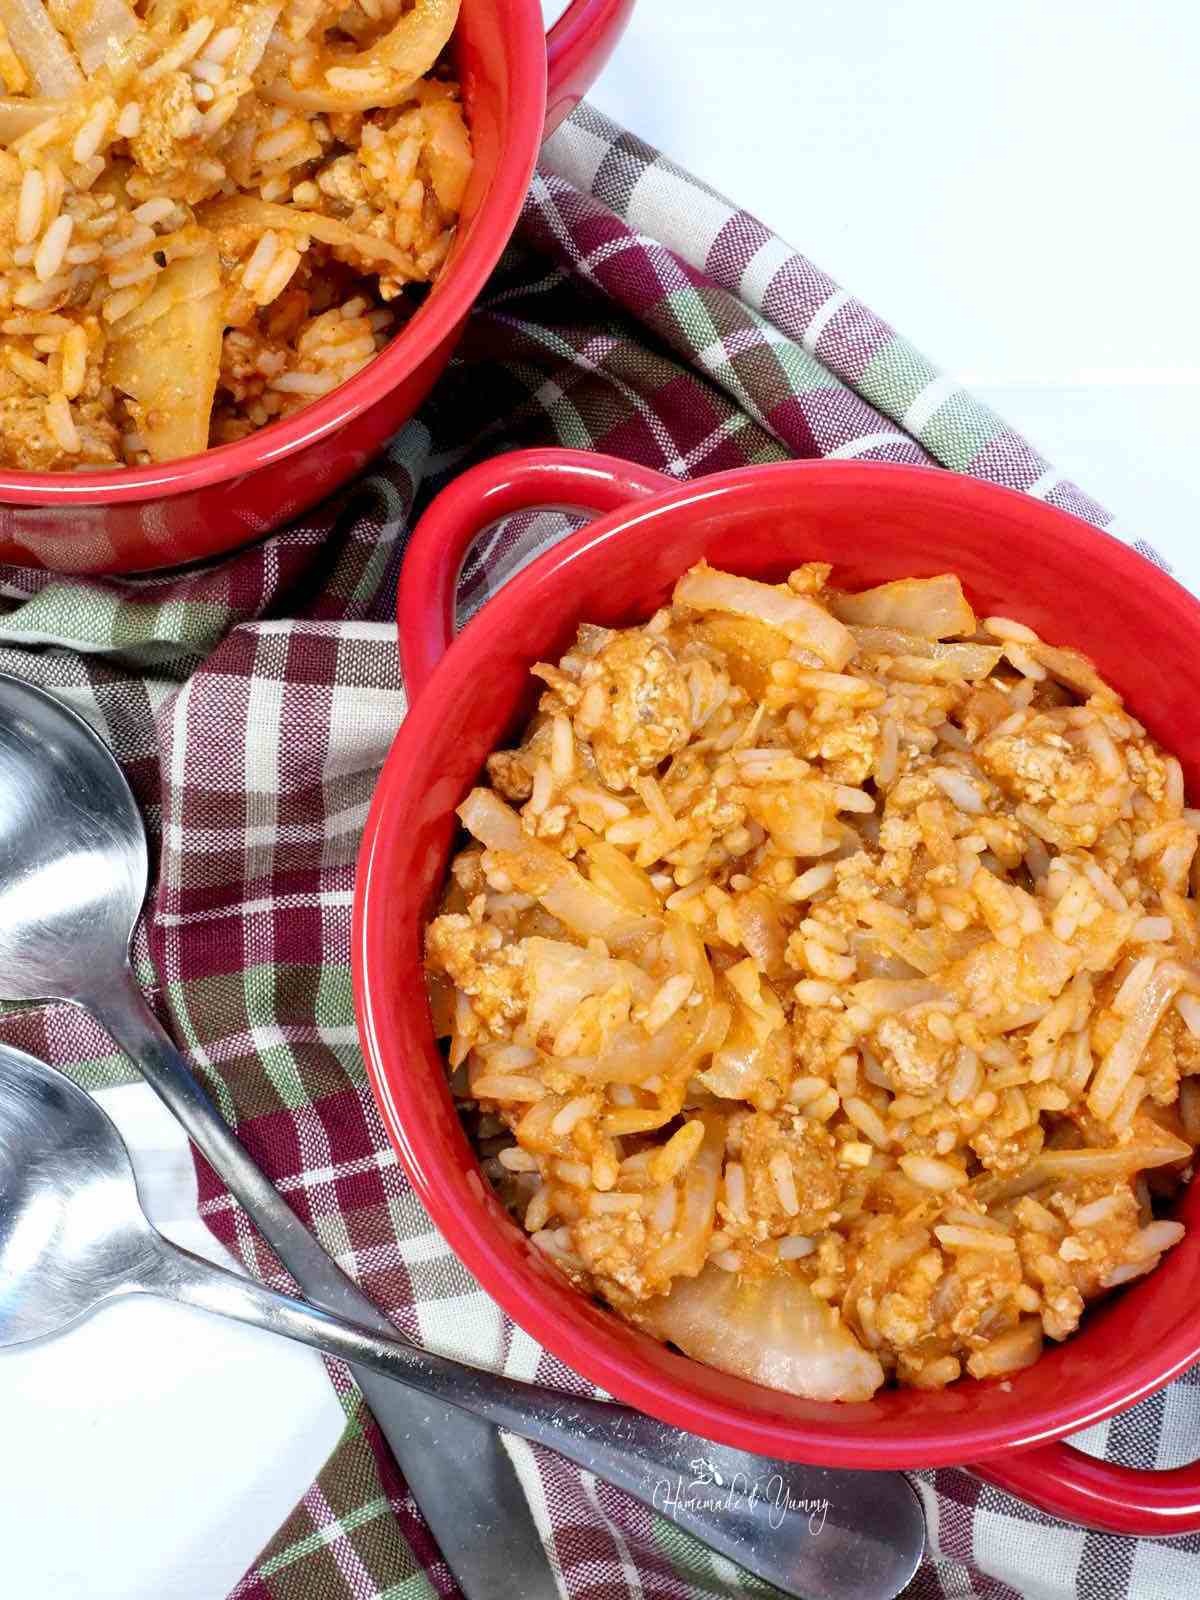 Unstuffed cabbage casserole in a red bowl.